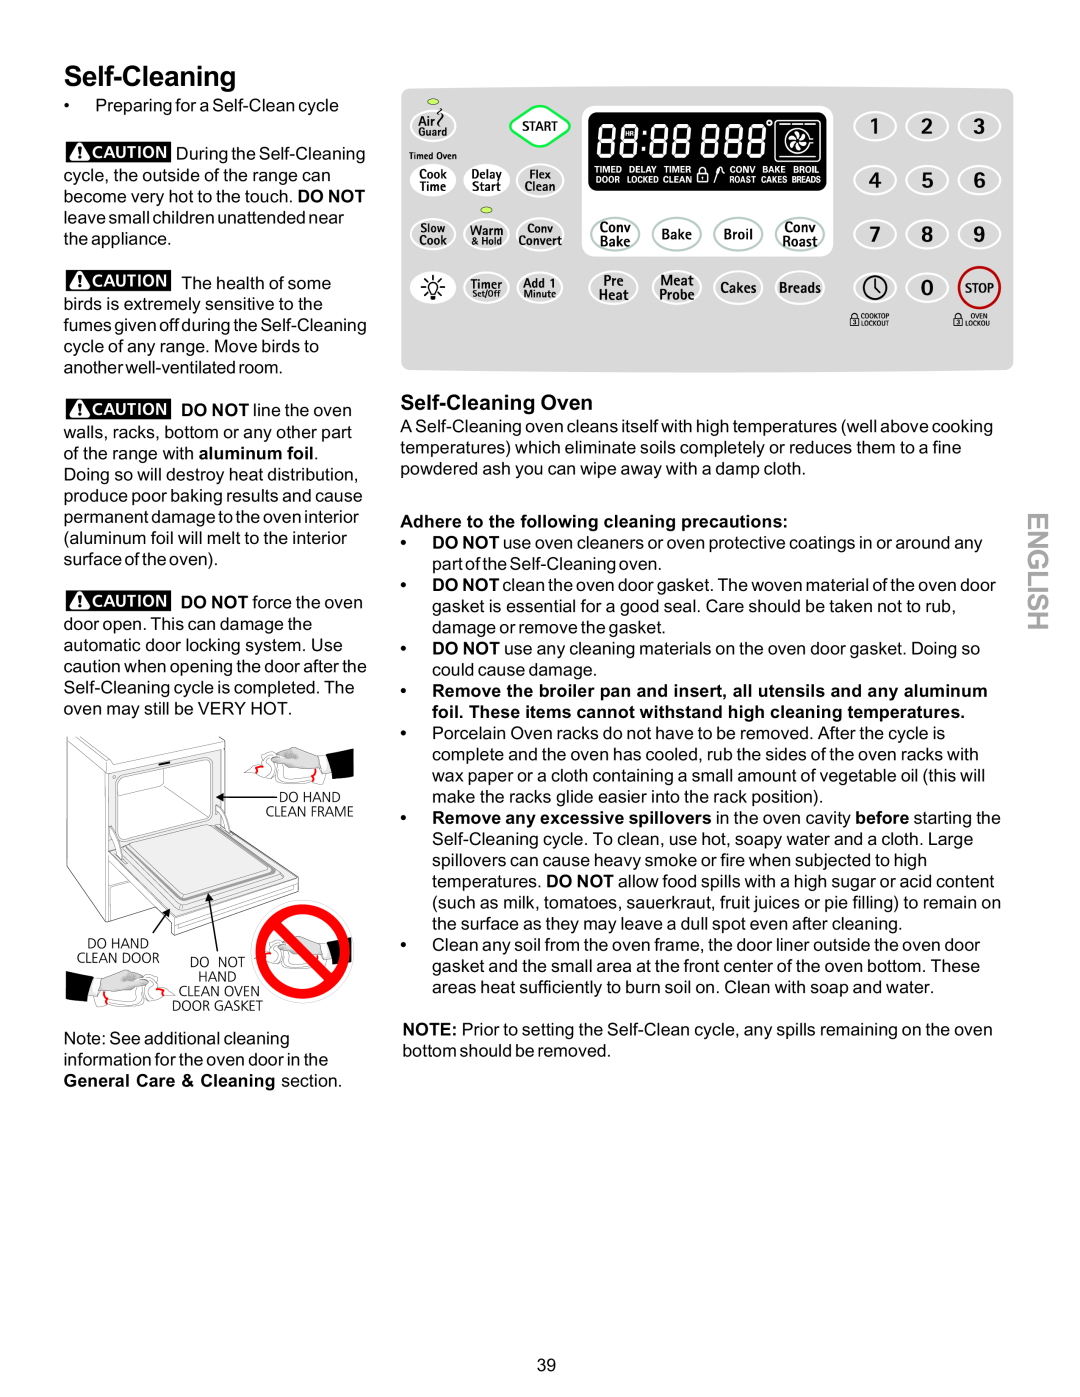 Kenmore 790-9663 manual Self-Cleaning Oven, Adhere to the following cleaning precautions, English 